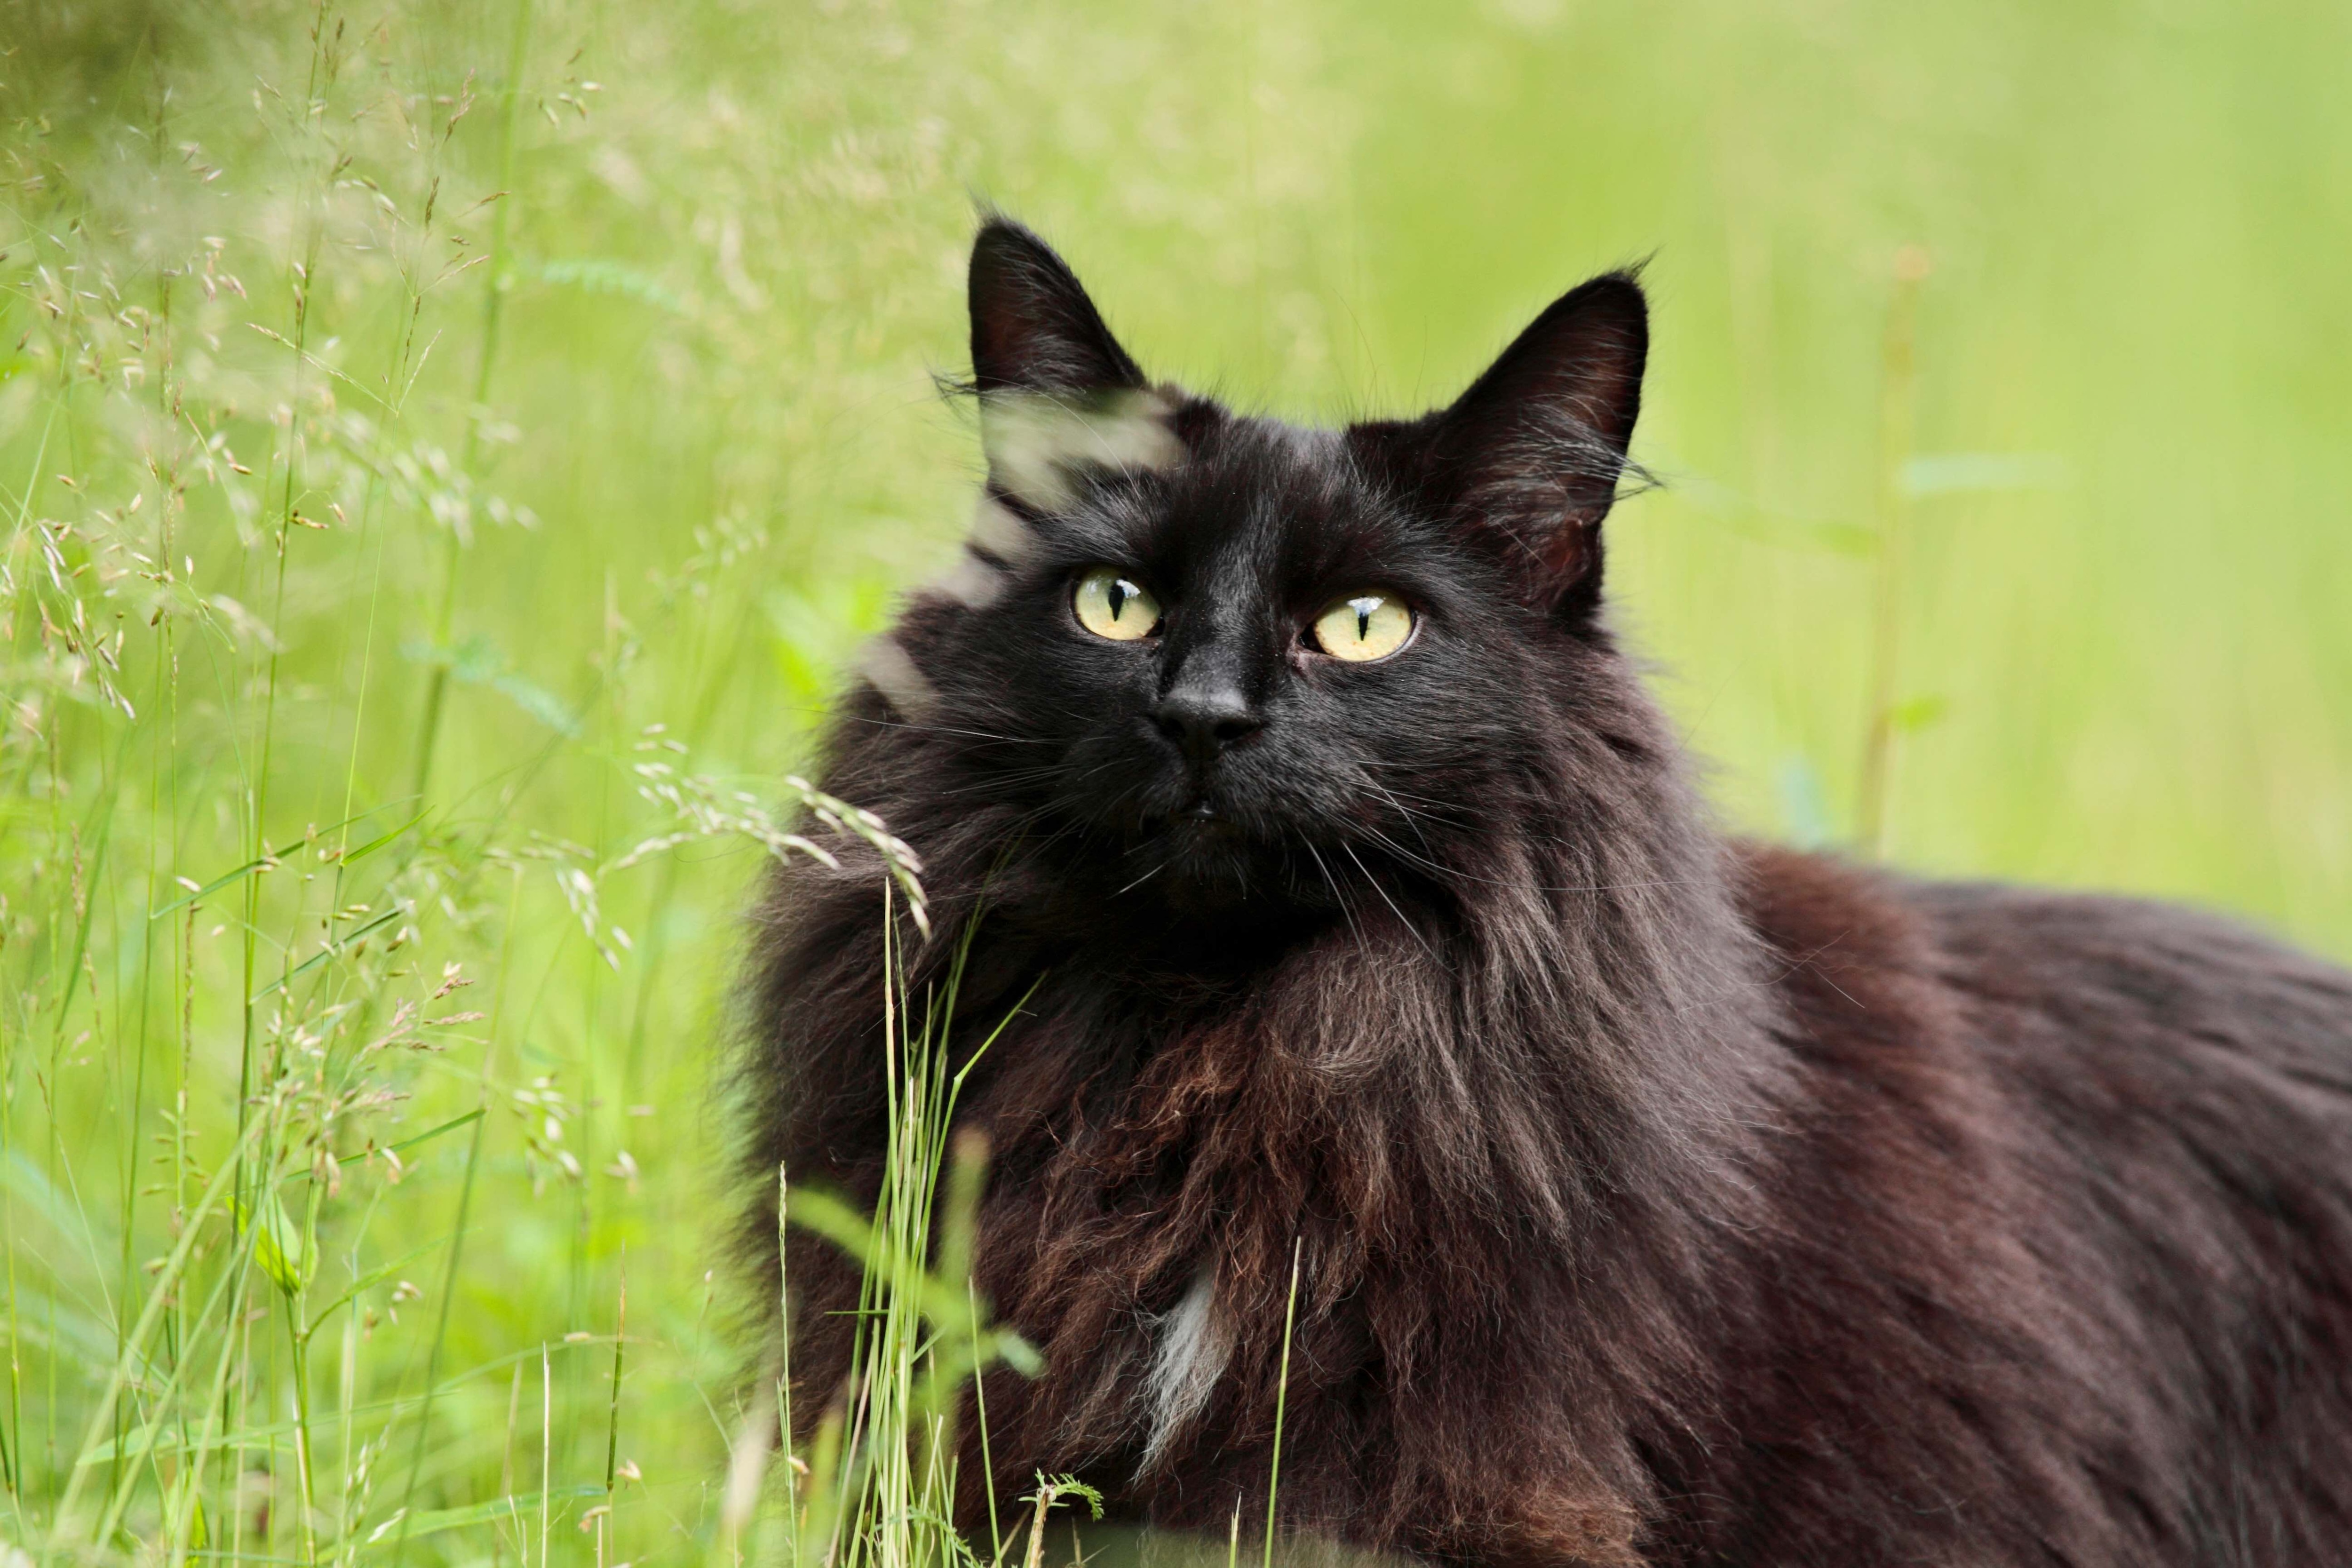 black longhaired cat with green eyes standing in green grass